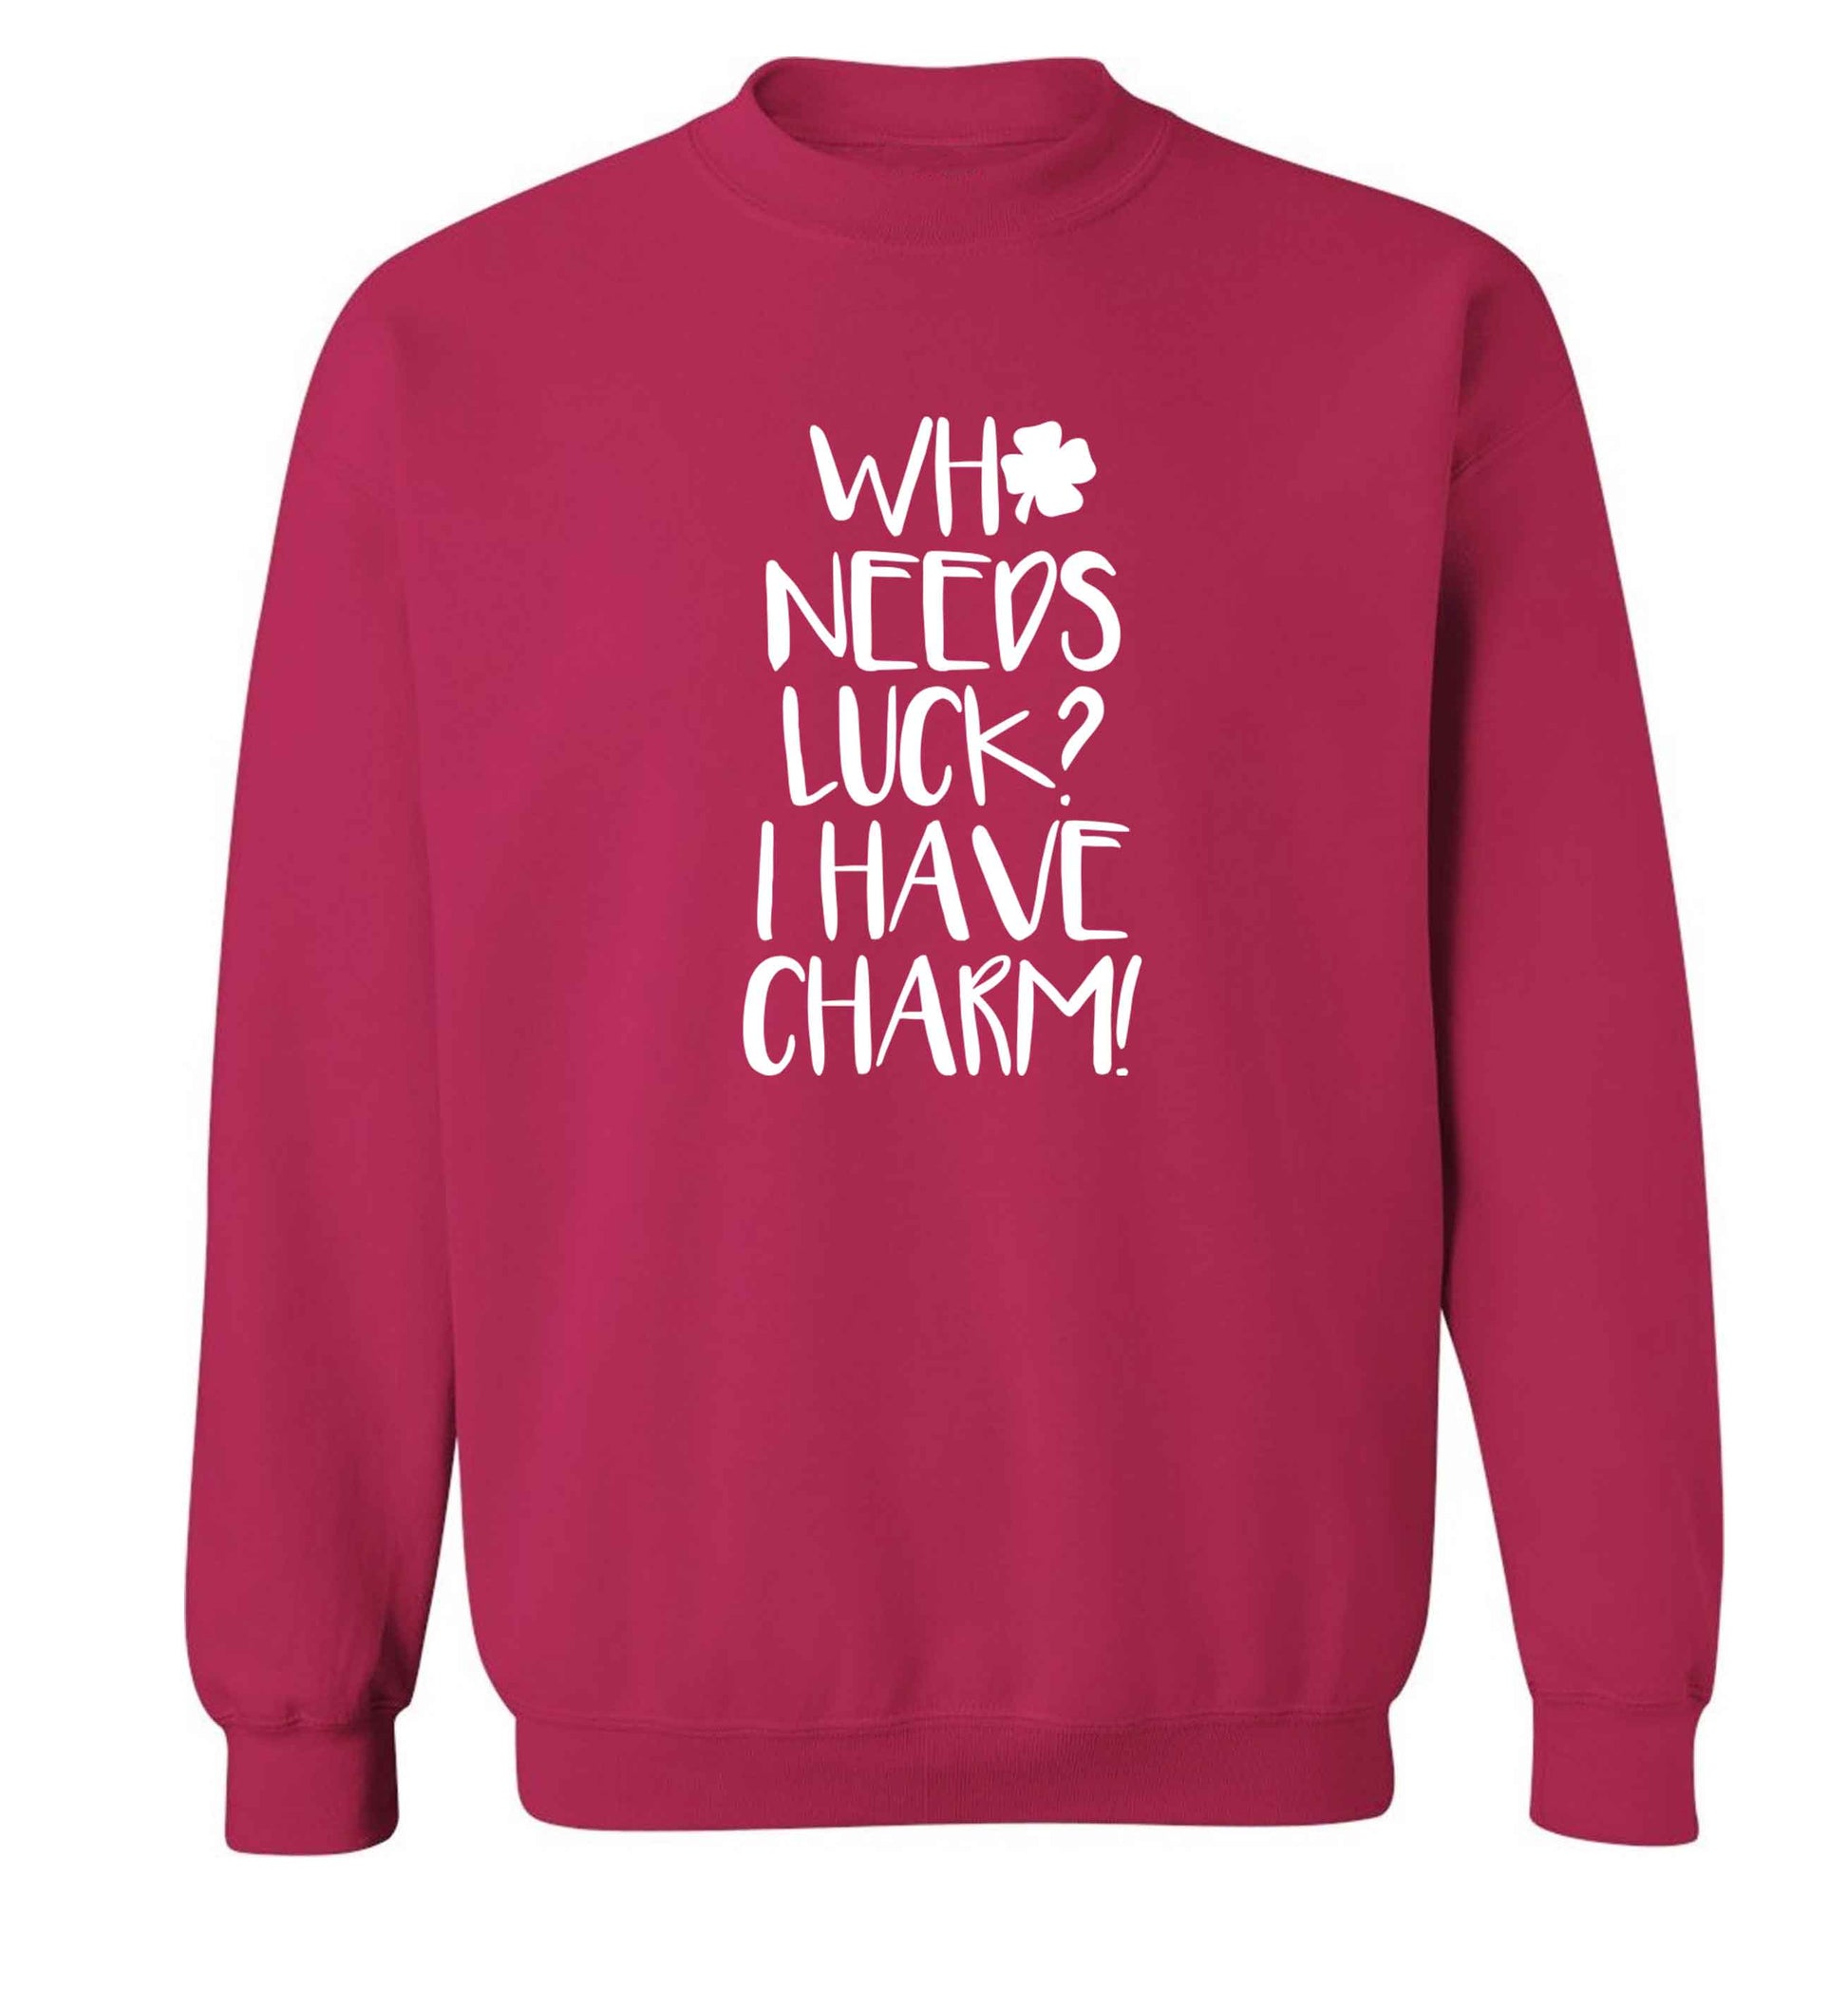 Who needs luck? I have charm! adult's unisex pink sweater 2XL